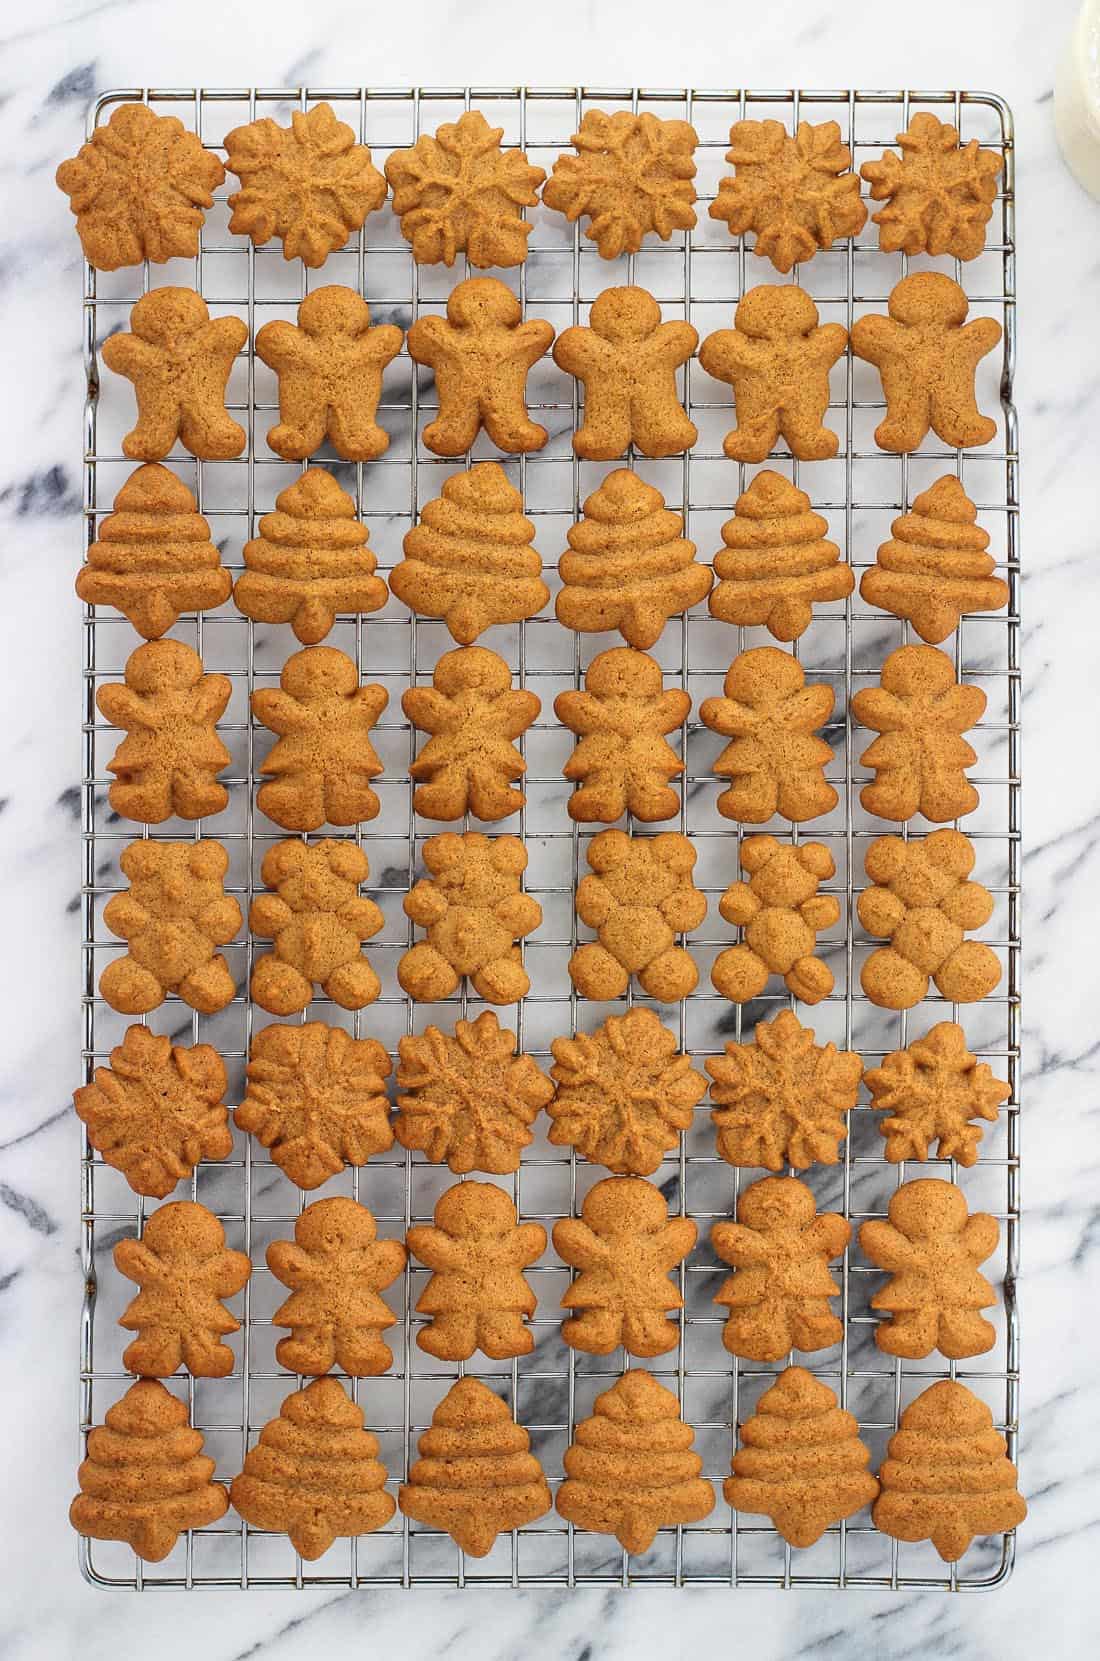 An overhead picture of rows of differently shaped cookies on a wire cooling rack